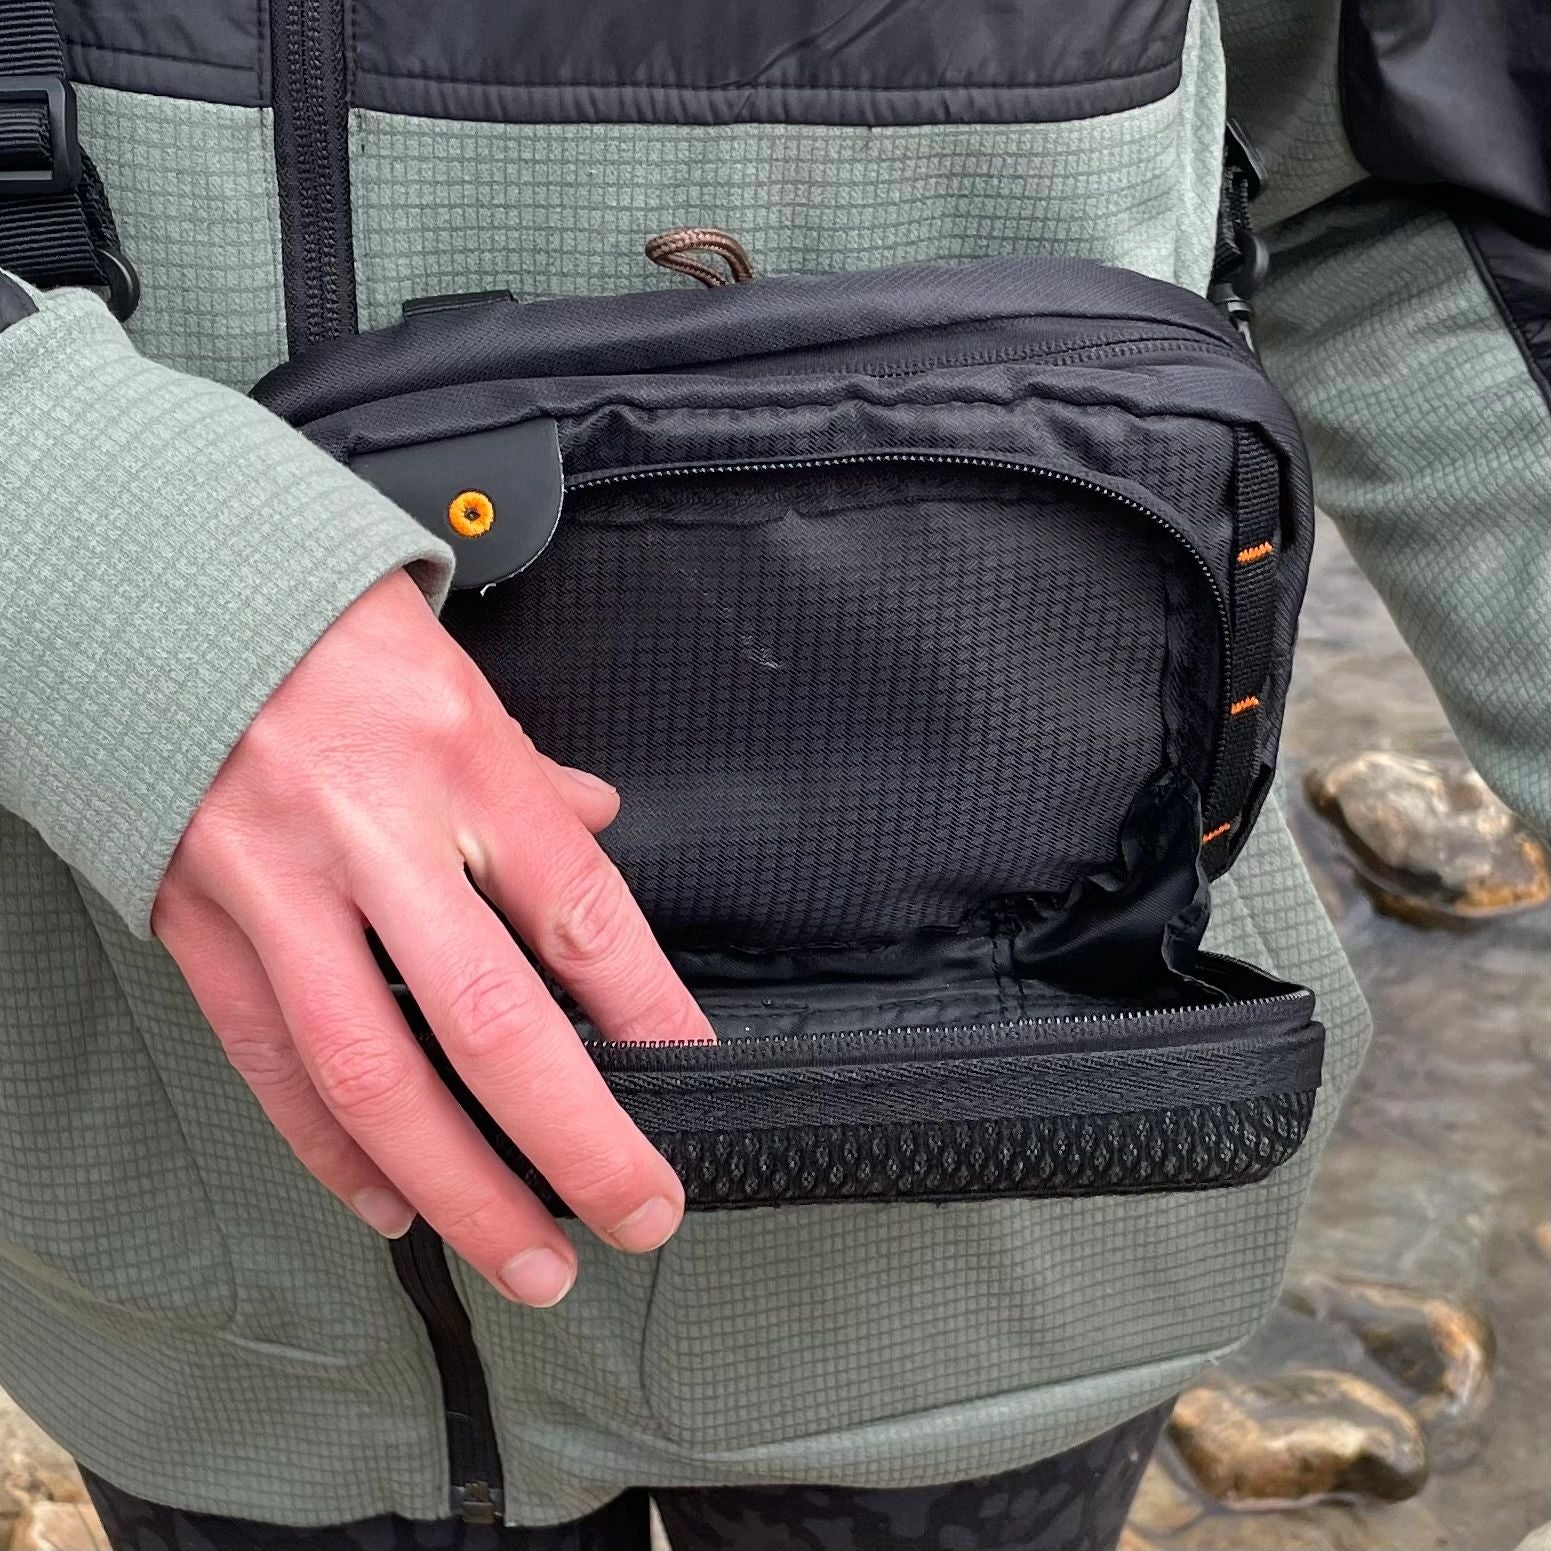 VERSA PACK FLY FISHING SYSTEM | BUDGET FRIENDLY VERSATILE FLY FISHING PACK | MINIMALIST FLY FISHING PACK